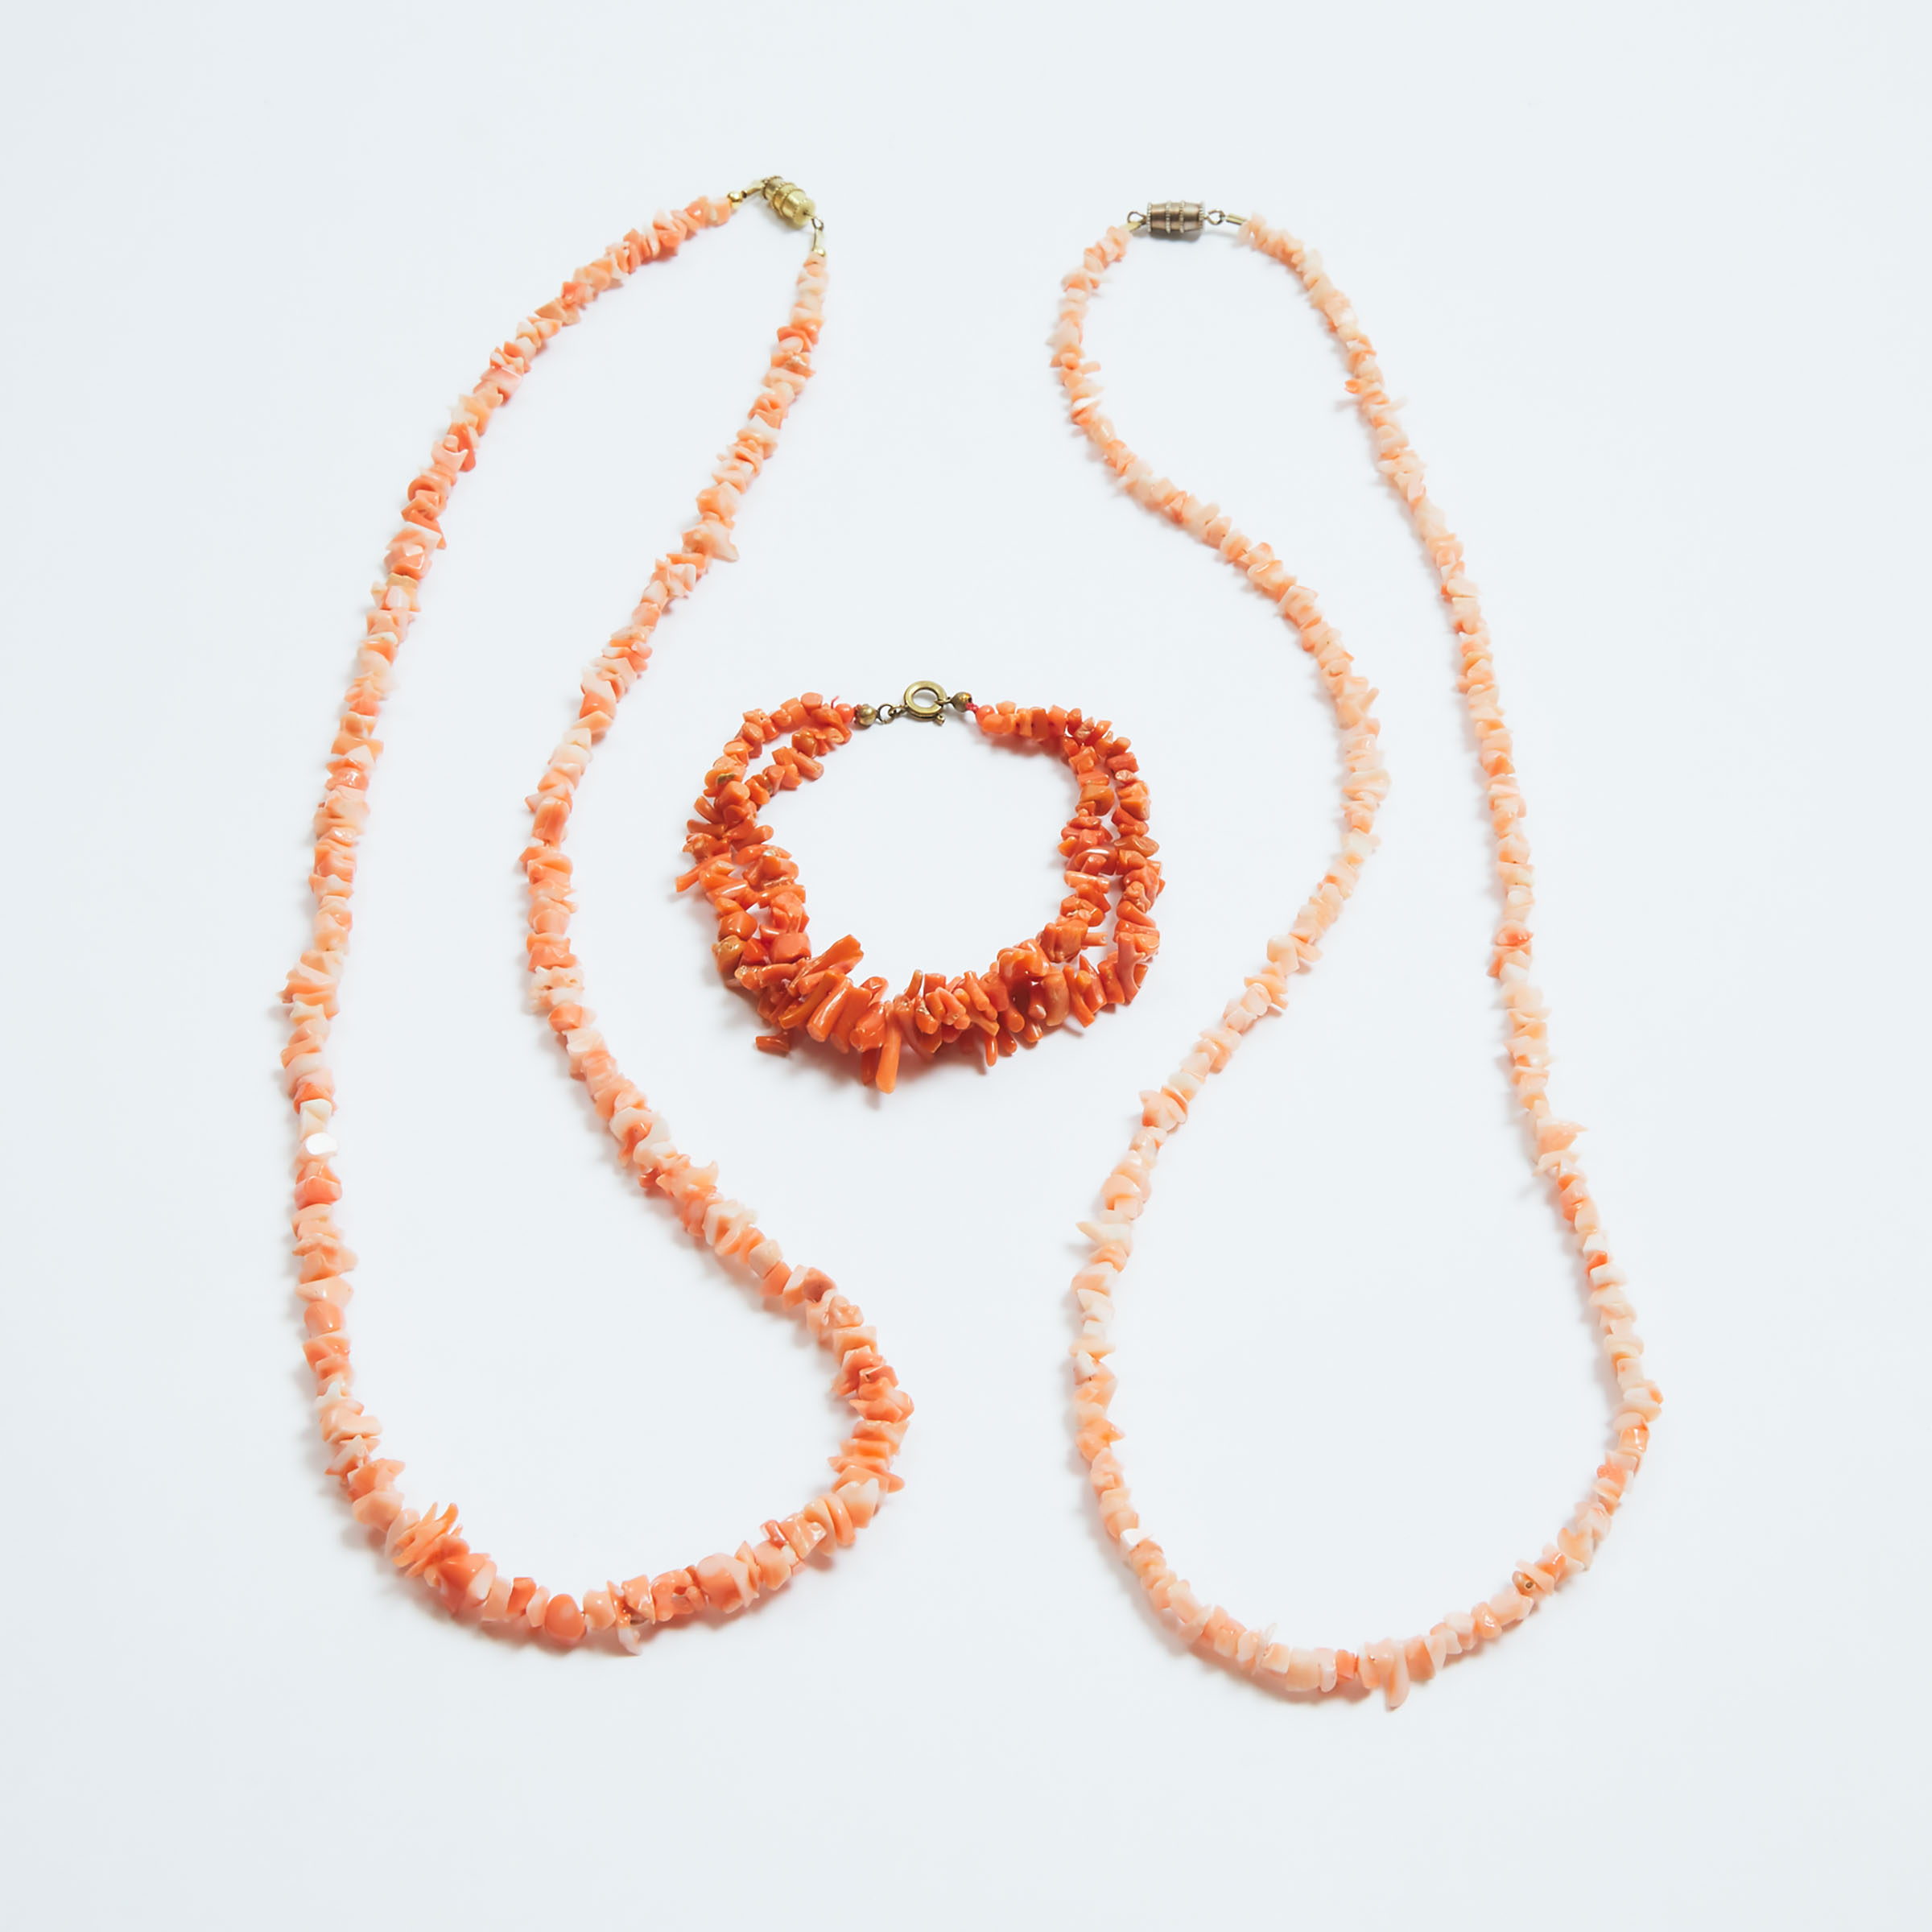 Three Strands of Natural Coral Jewellery 